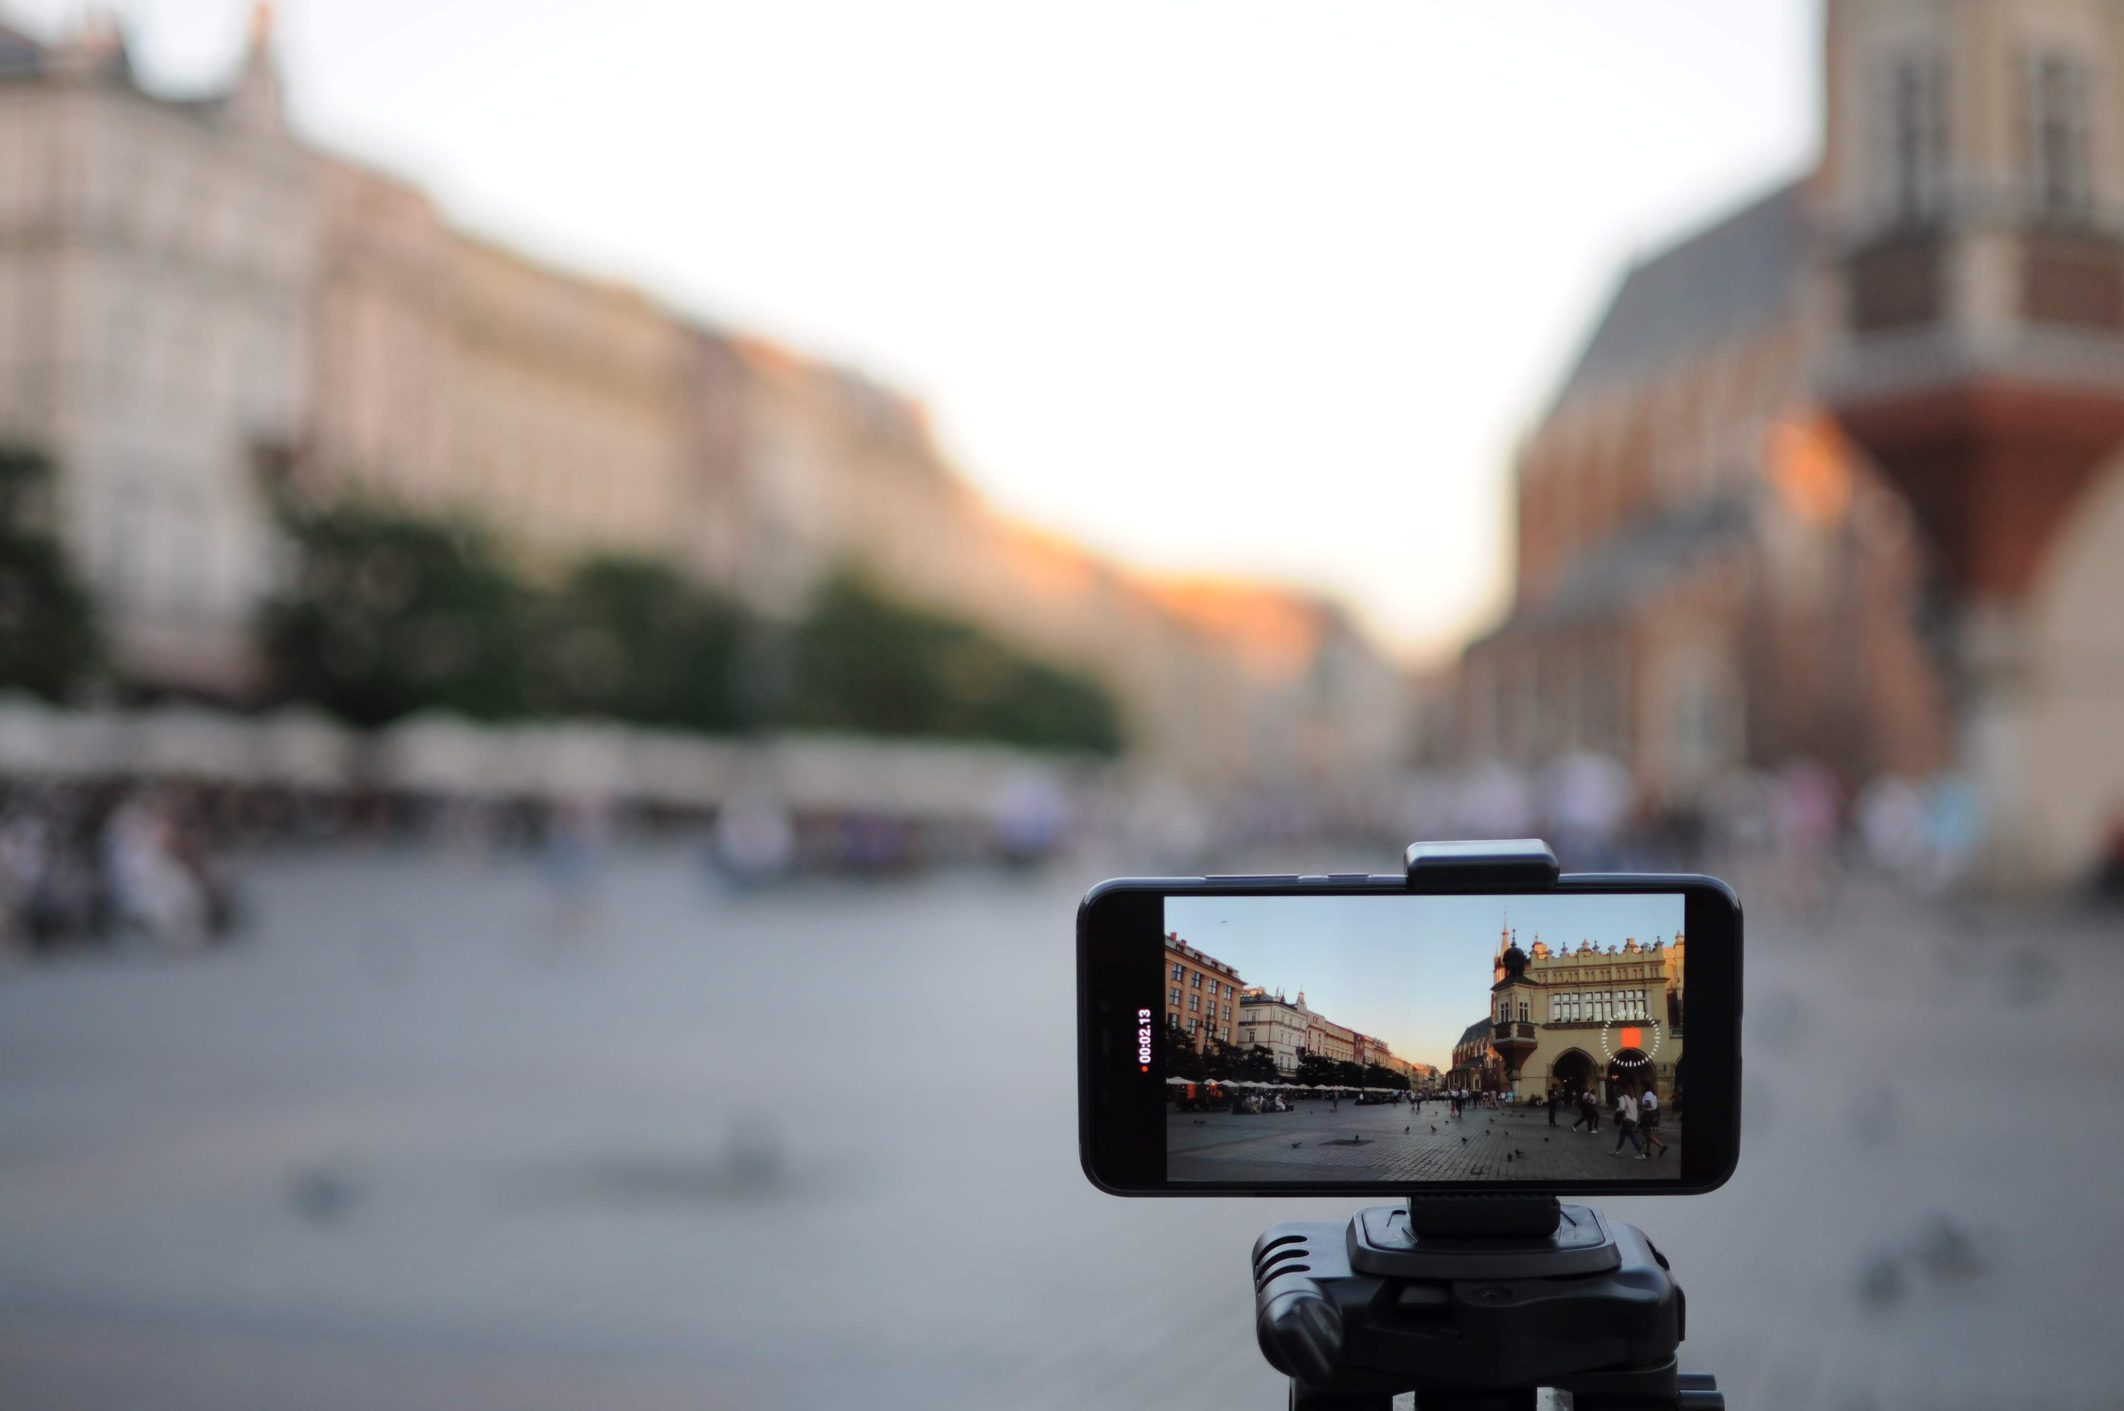 Your Tourism & Hospitality Marketing Needs Video (Here’s Why)